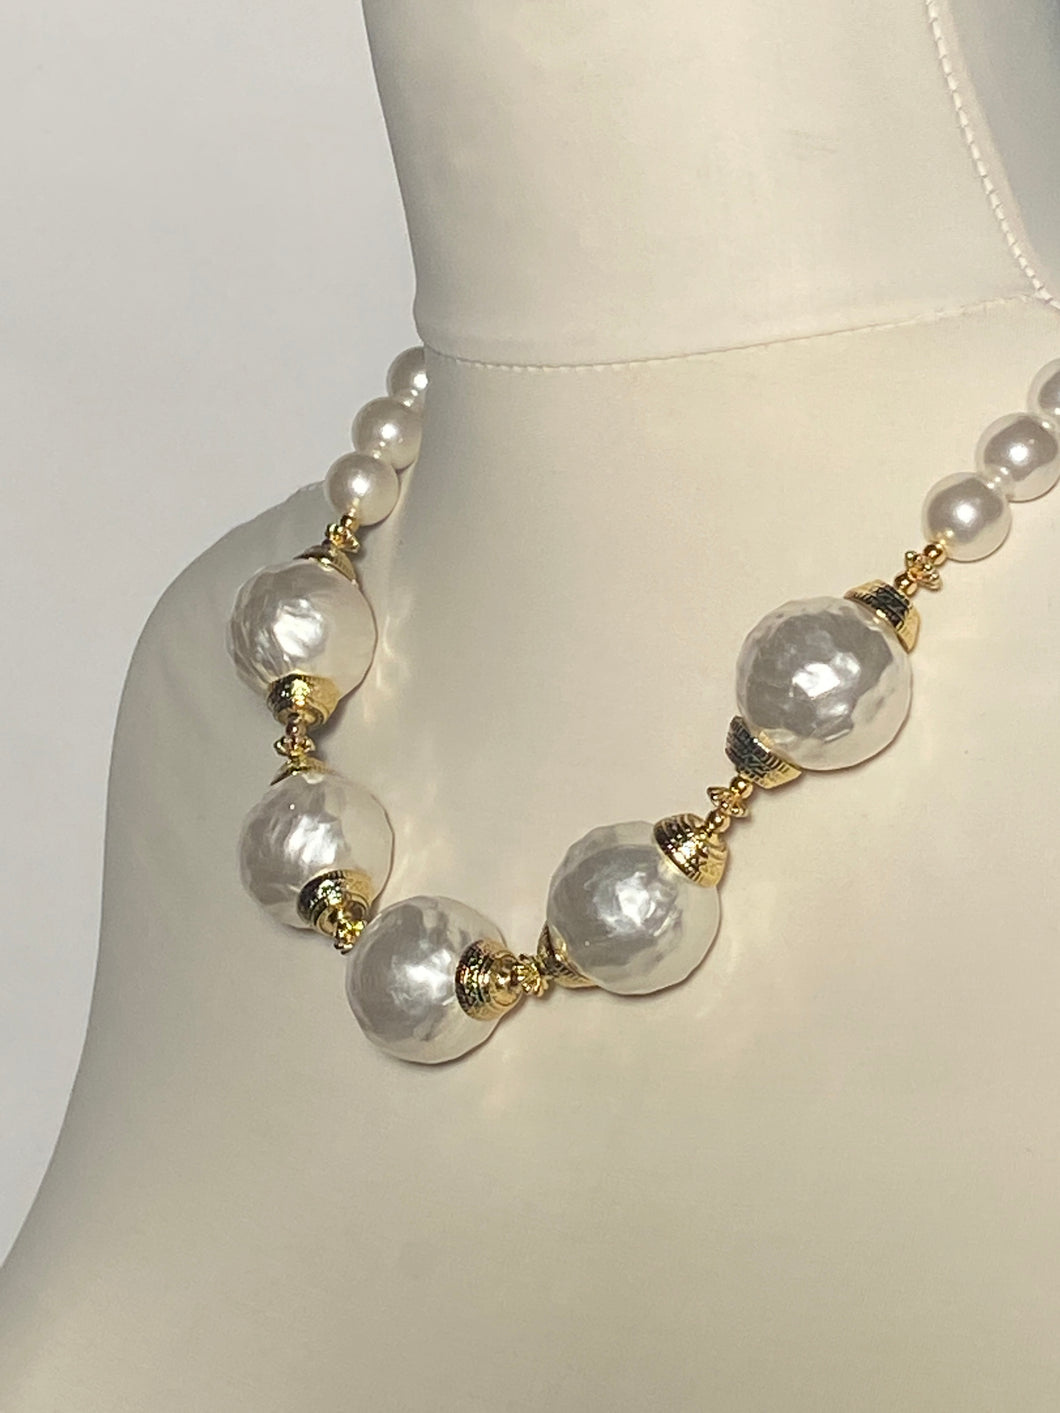 1980s Faux pearly Necklace Large Ball Center